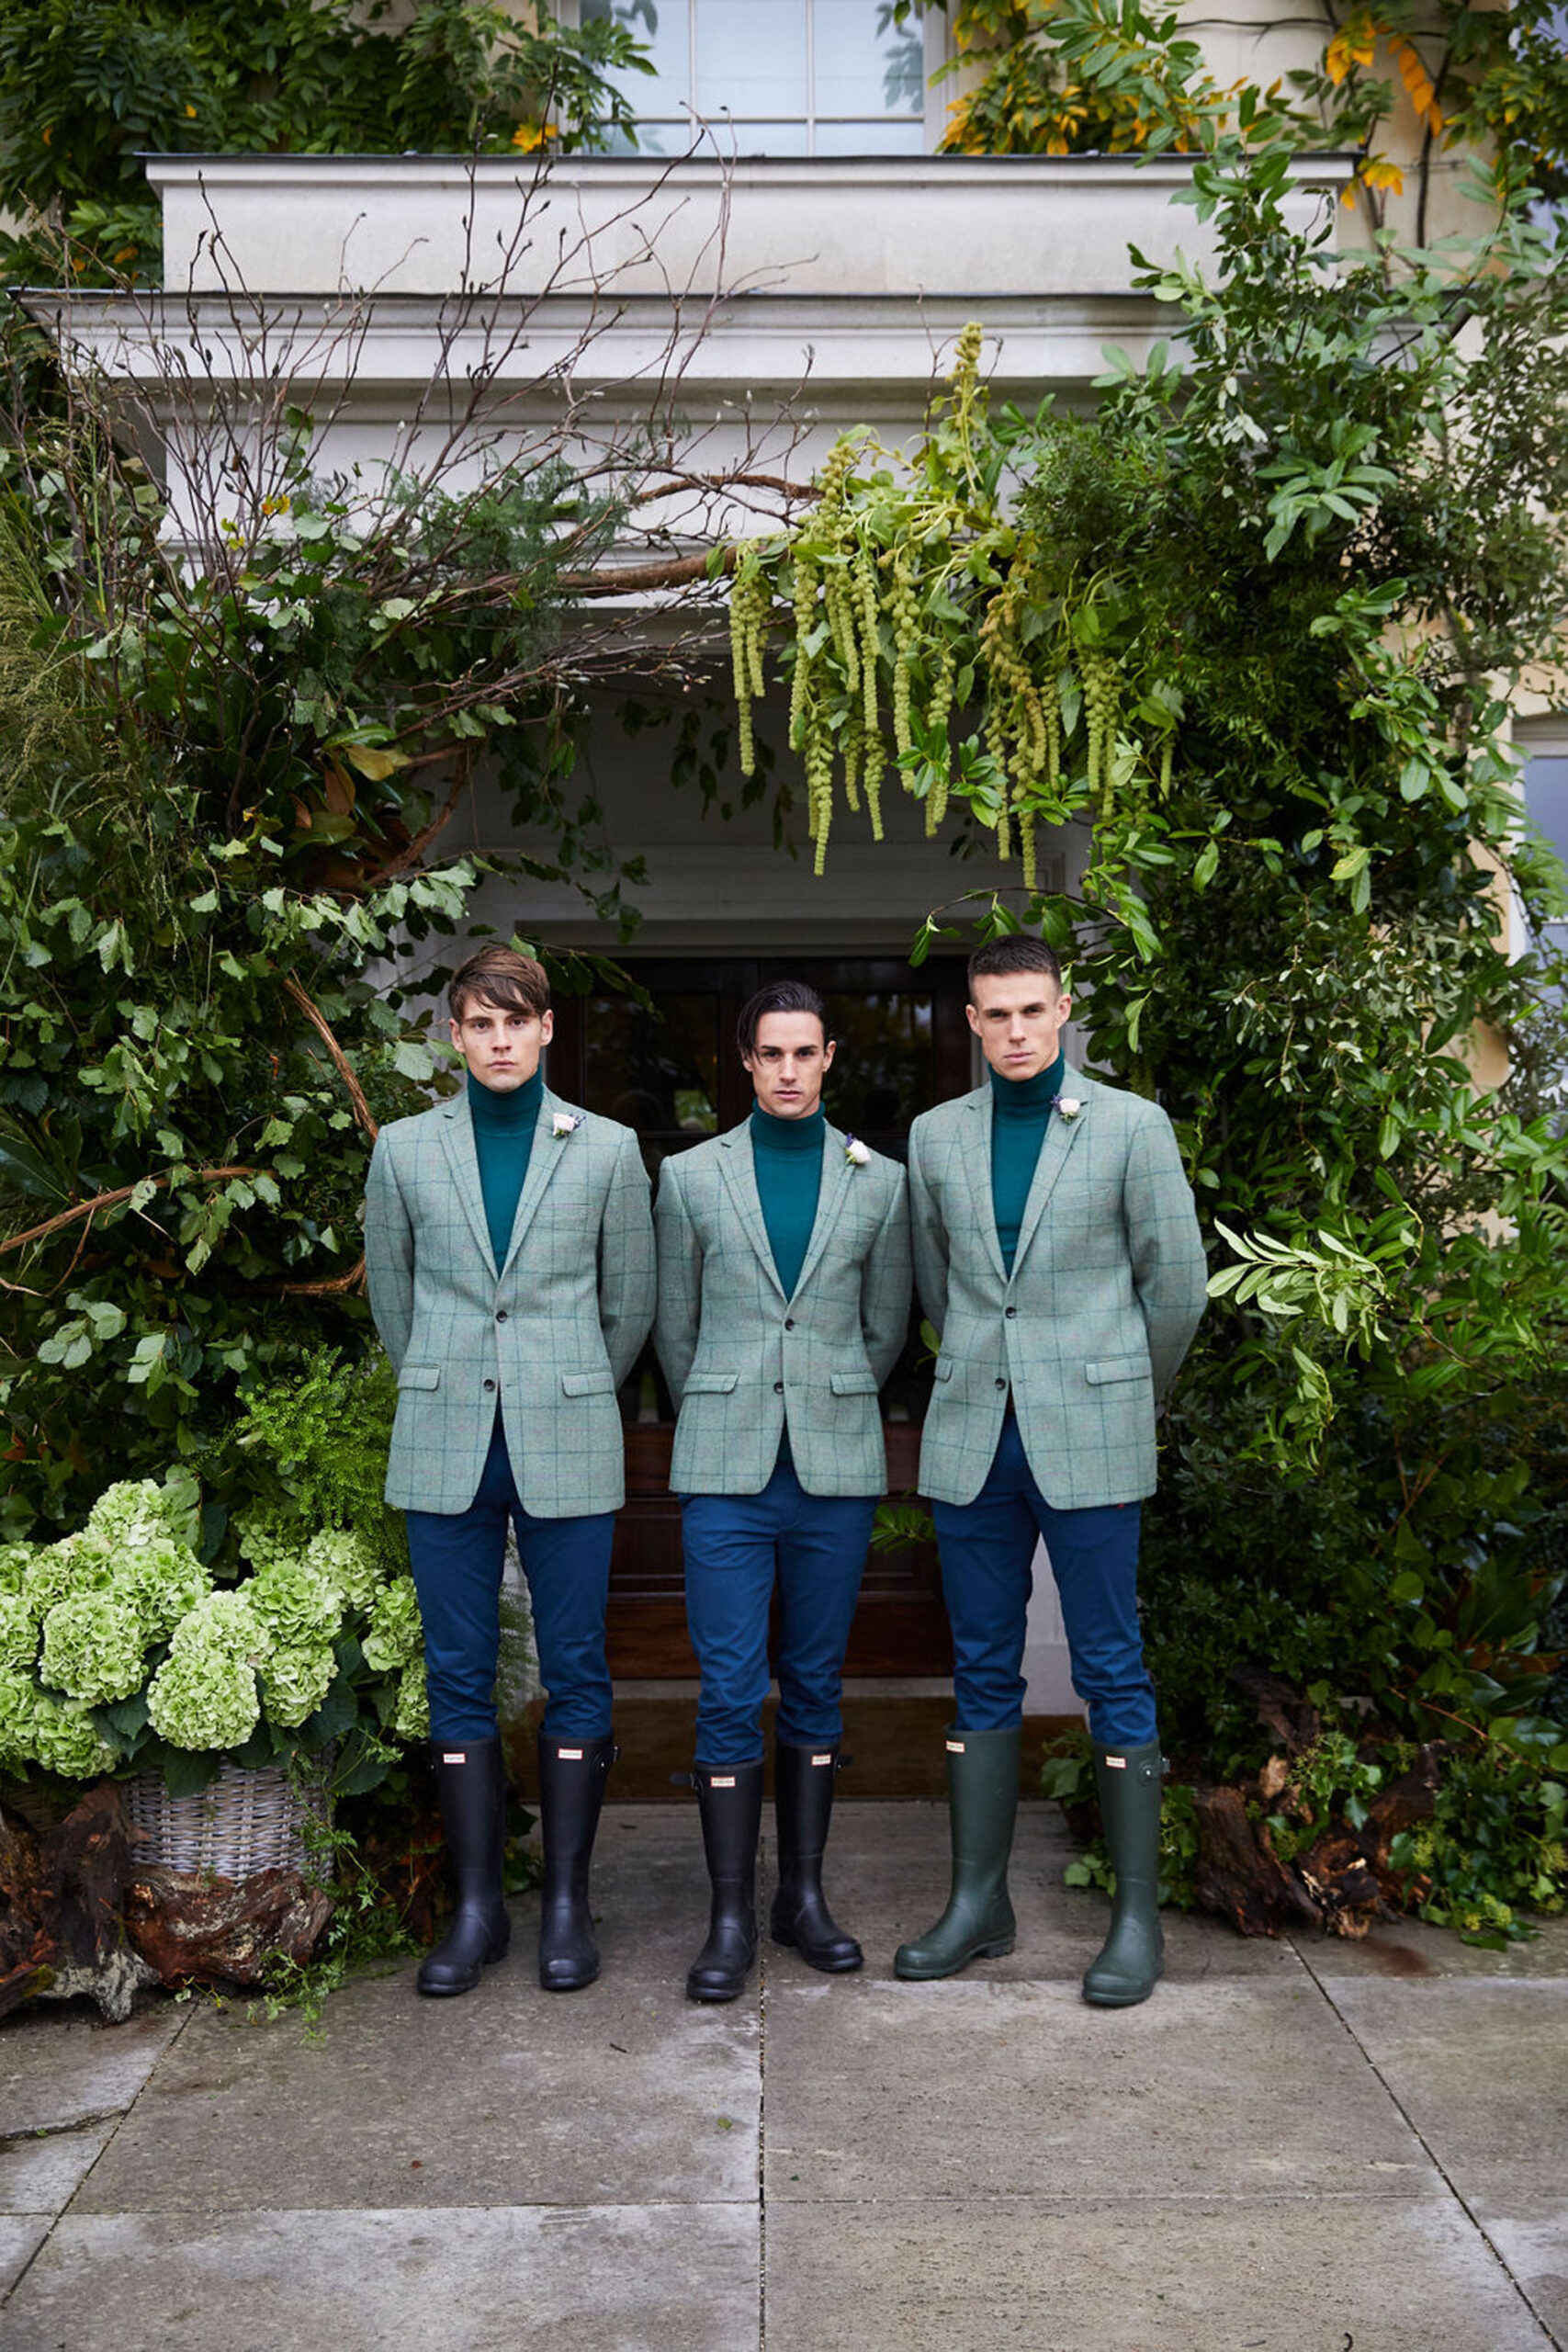 Three Niemierko hosts dressed in green jackets and boots stand amidst a display of greenery with leaves and luxurious green hydrangeas